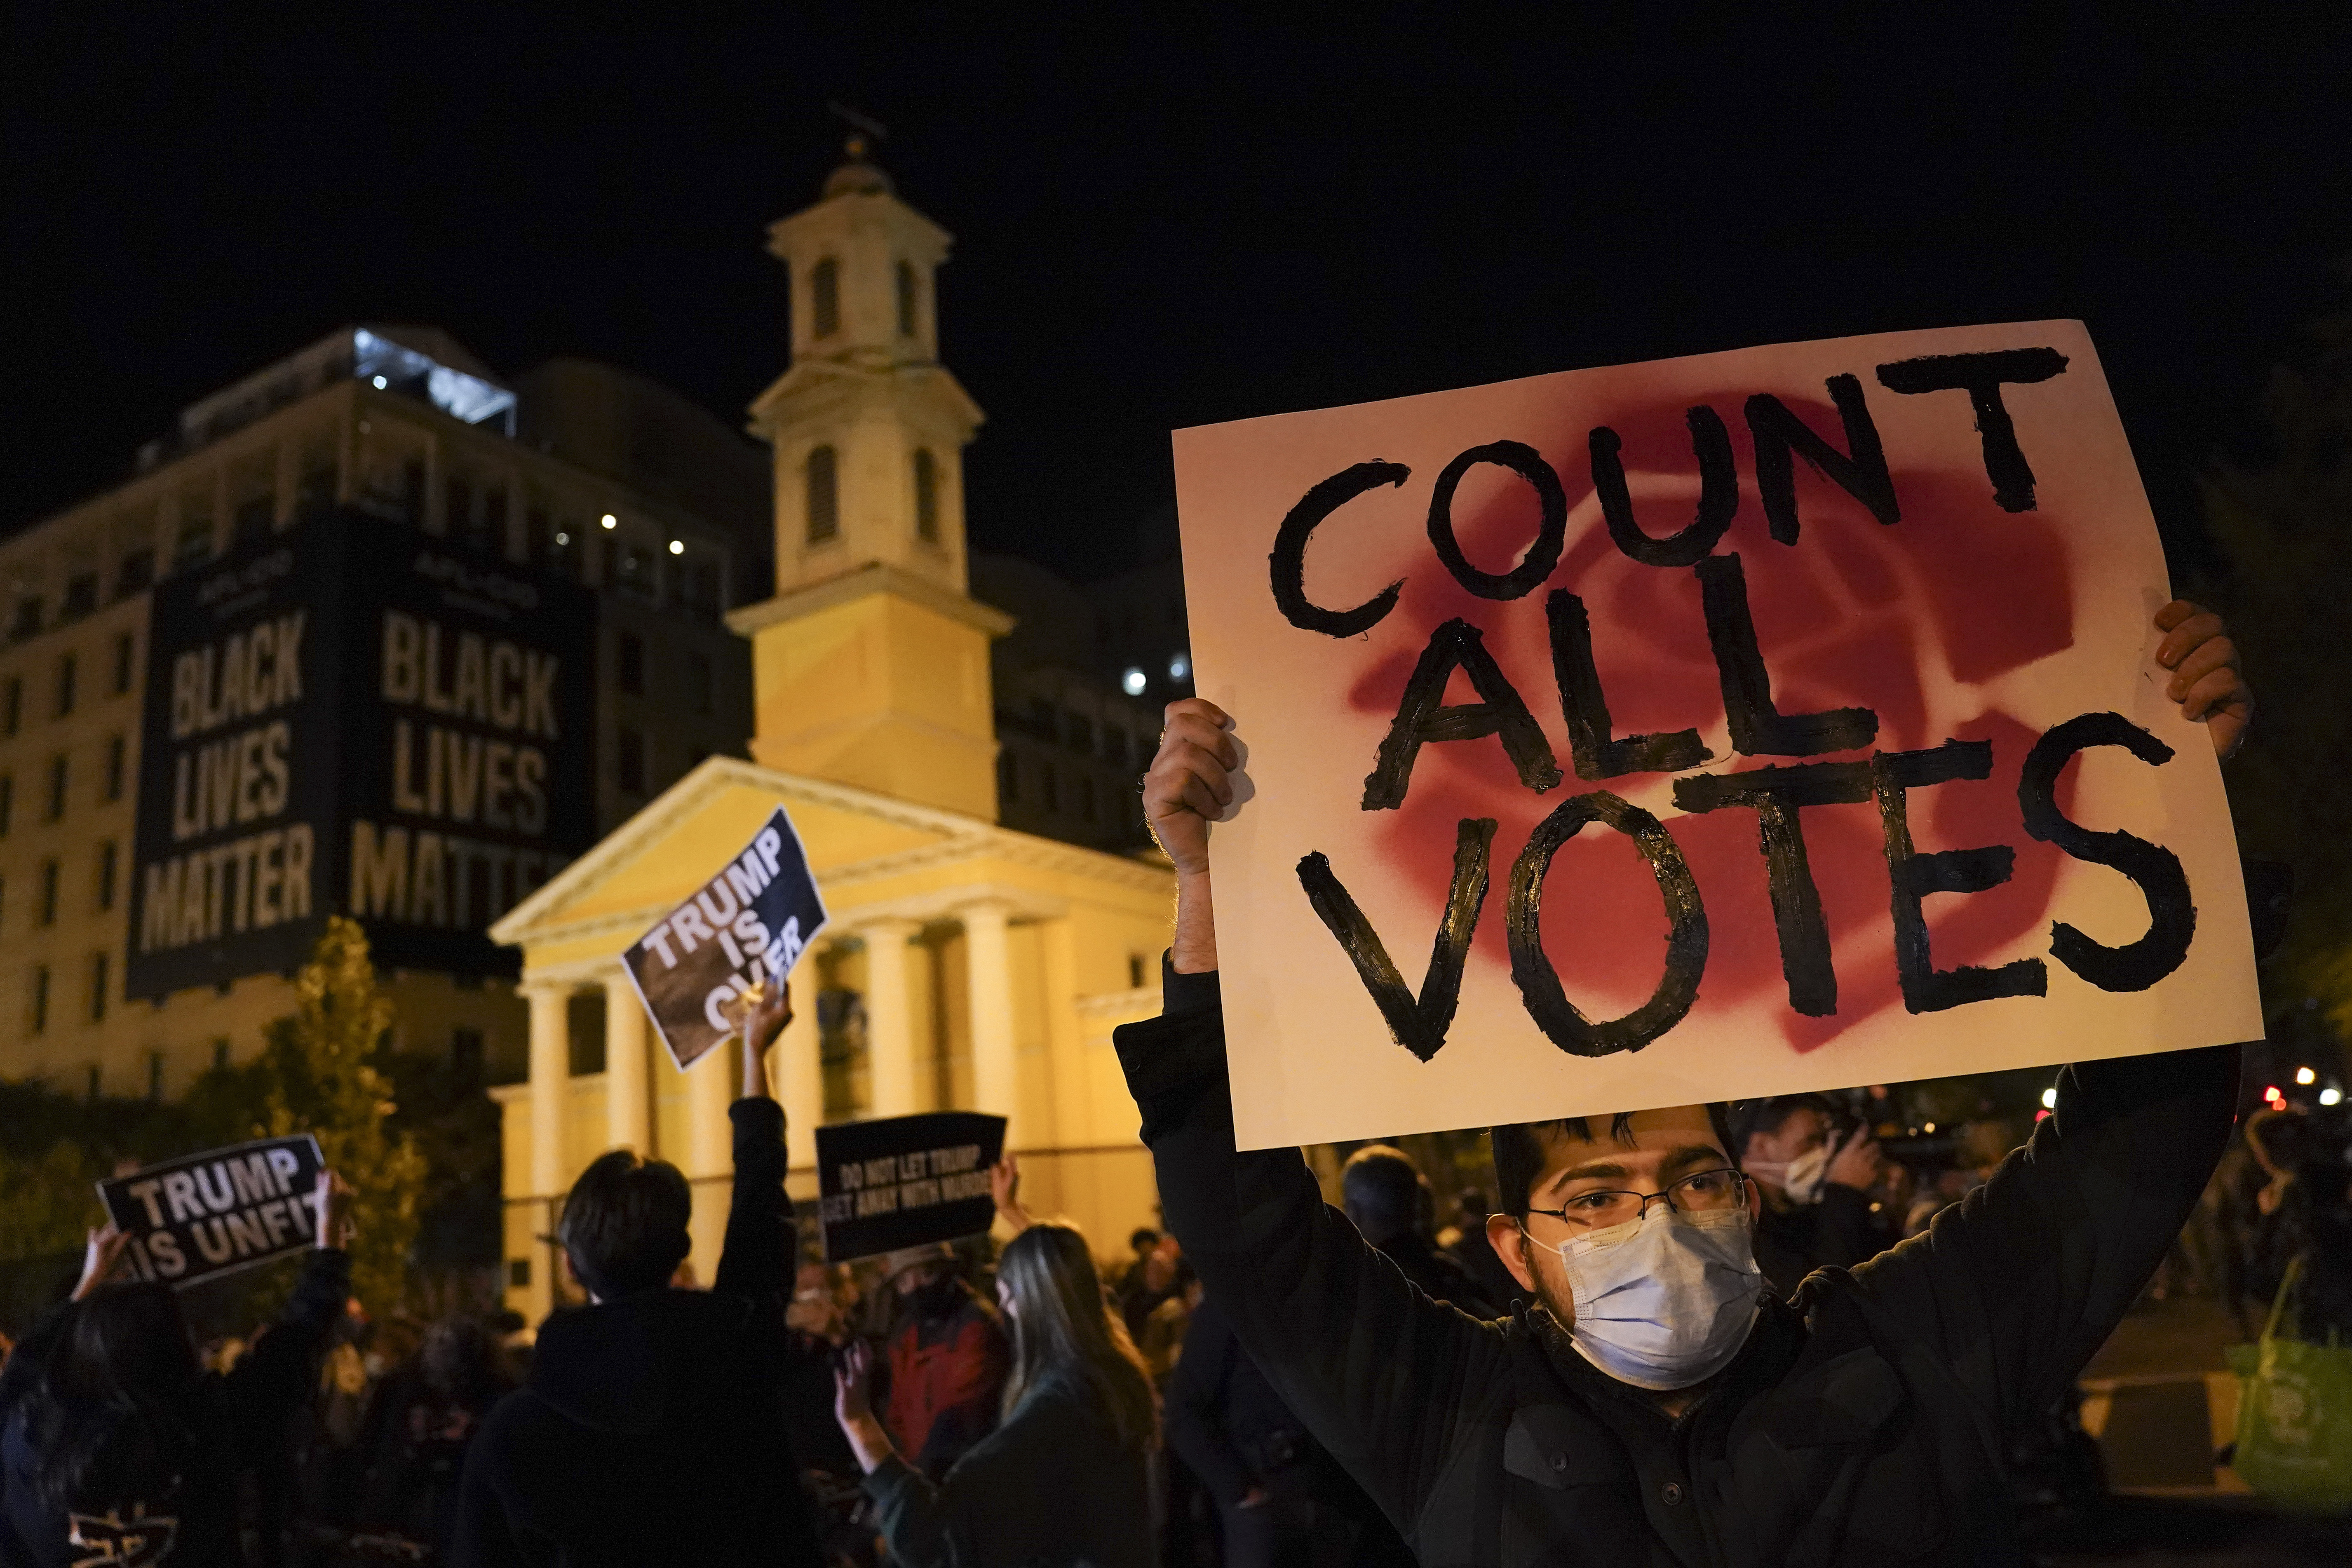 A demonstrator holds up a sign while waiting for election results at Black Lives Matter Plaza, Tuesday, Nov. 3, 2020, in Washington. (AP Photo/John Minchillo)